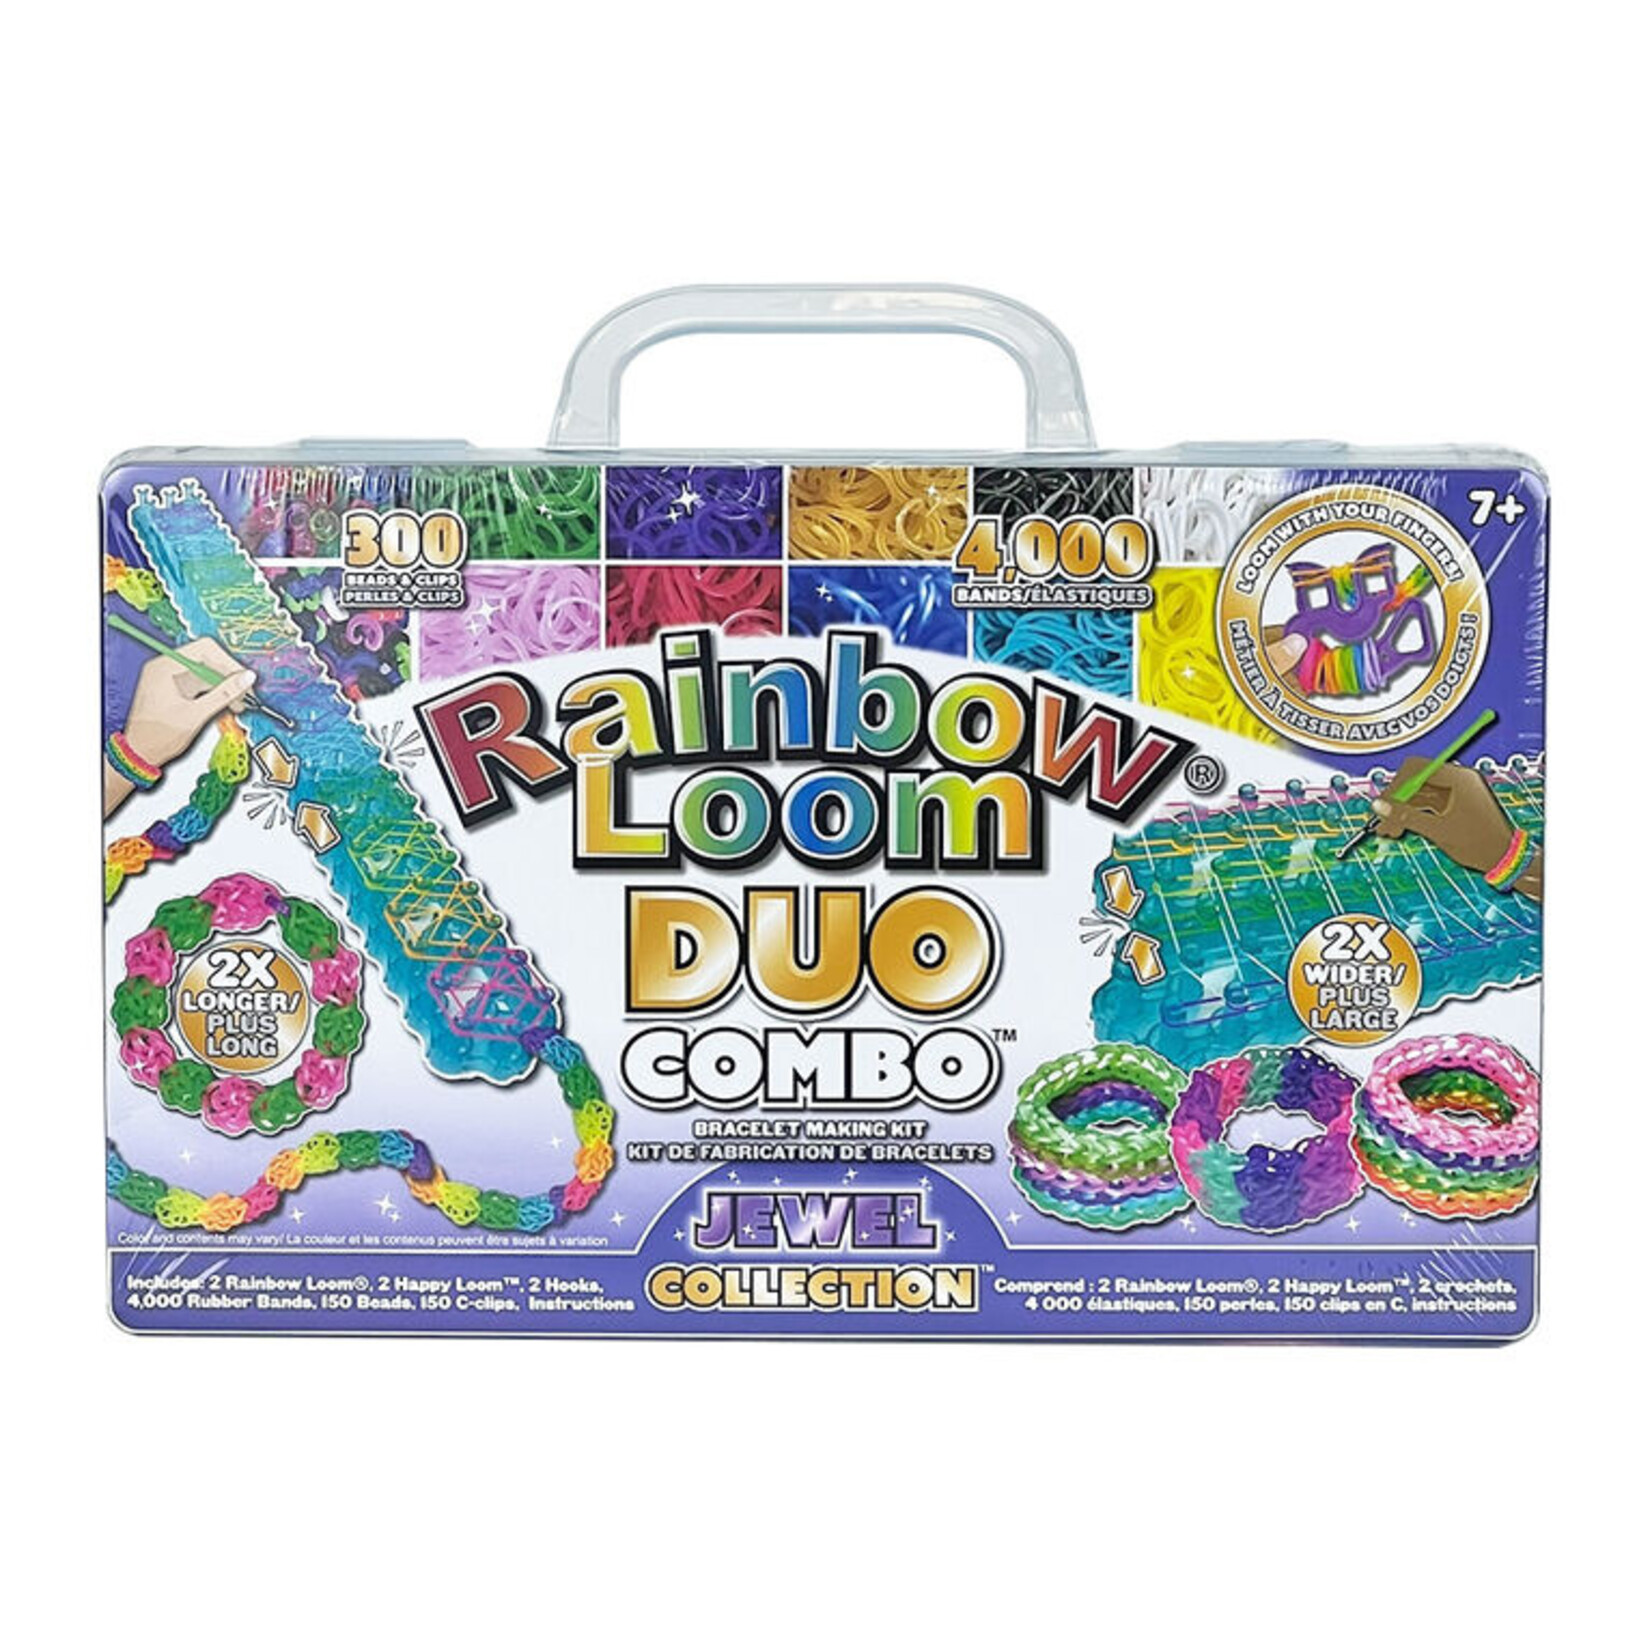  Rainbow Loom® Duo Combo with Jewel Rubber Bands Collection,  Features 2 connectable to Make Longer and Wider Creations, an Organizer Case,  Great Activity up to 4 People 7+ : Toys & Games